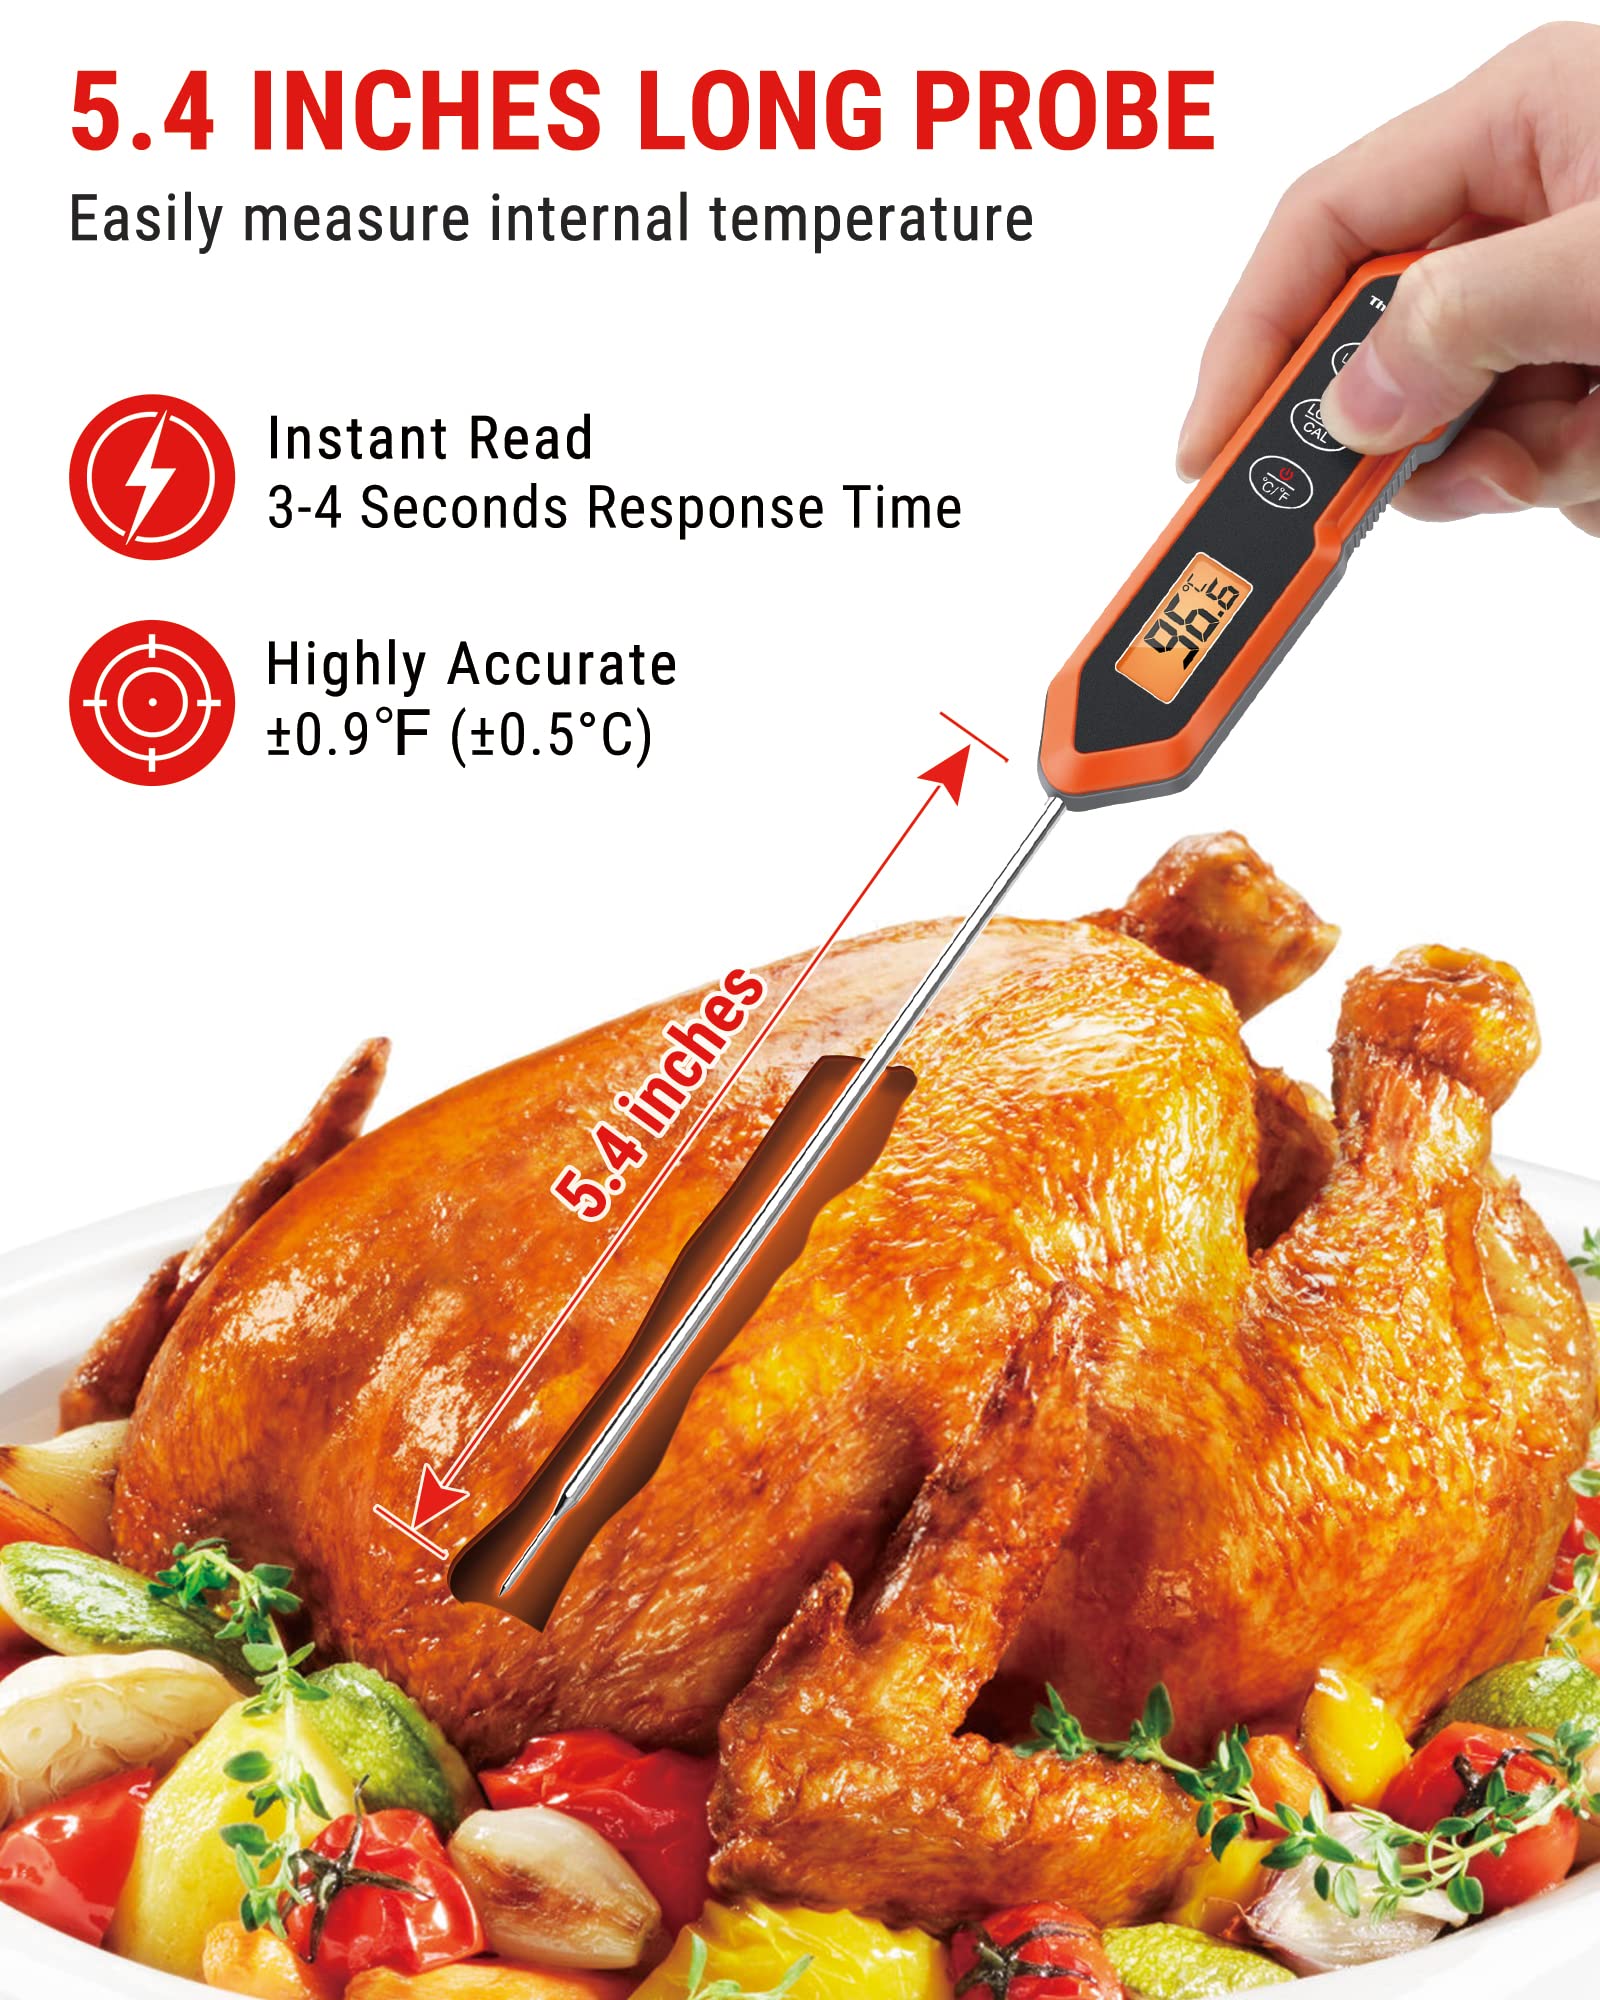 ThermoPro TP829 Wireless Meat Thermometer for Grilling and Smoking with ThermoPro TP15H Waterproof Instant Read Food Thermometer